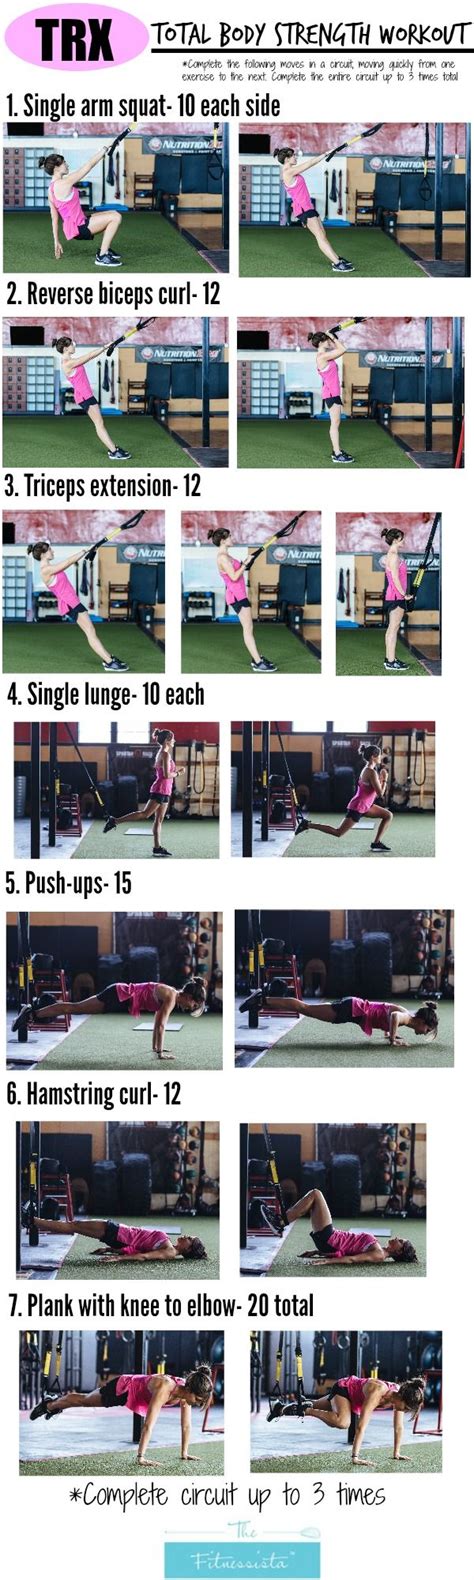 Work Your Entire Body With This Trx Circuit Routine Trx Workouts